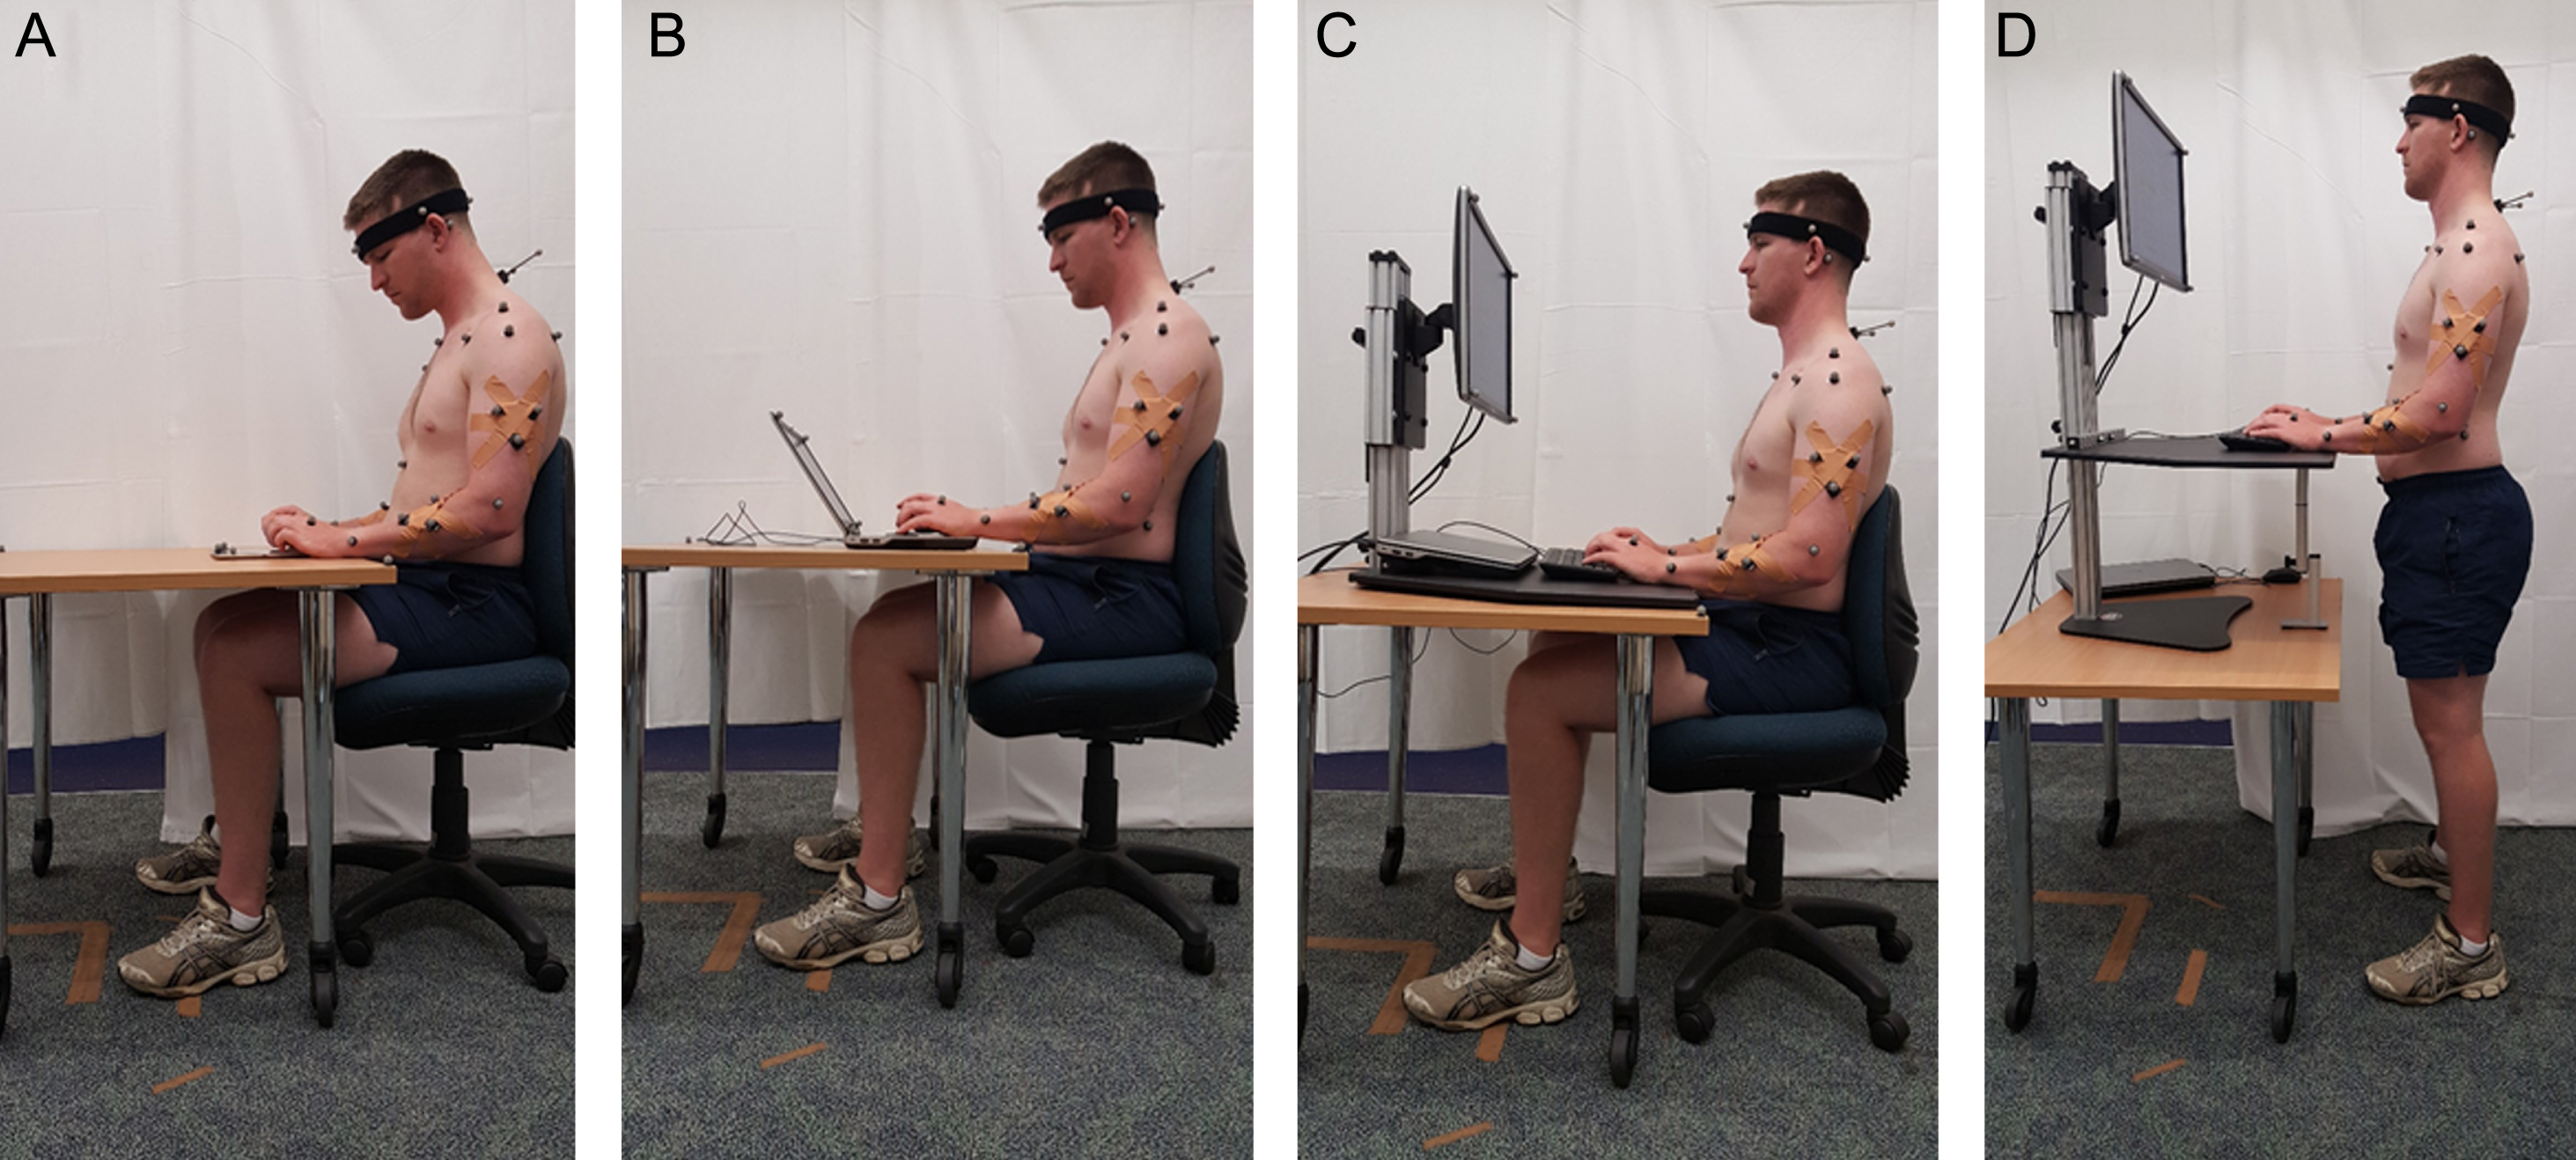 Device placement for each experimental condition: (A) tablet, (B) laptop, (C) desktop, sitting, and (D) desktop, standing, with retro-reflective marker configuration.